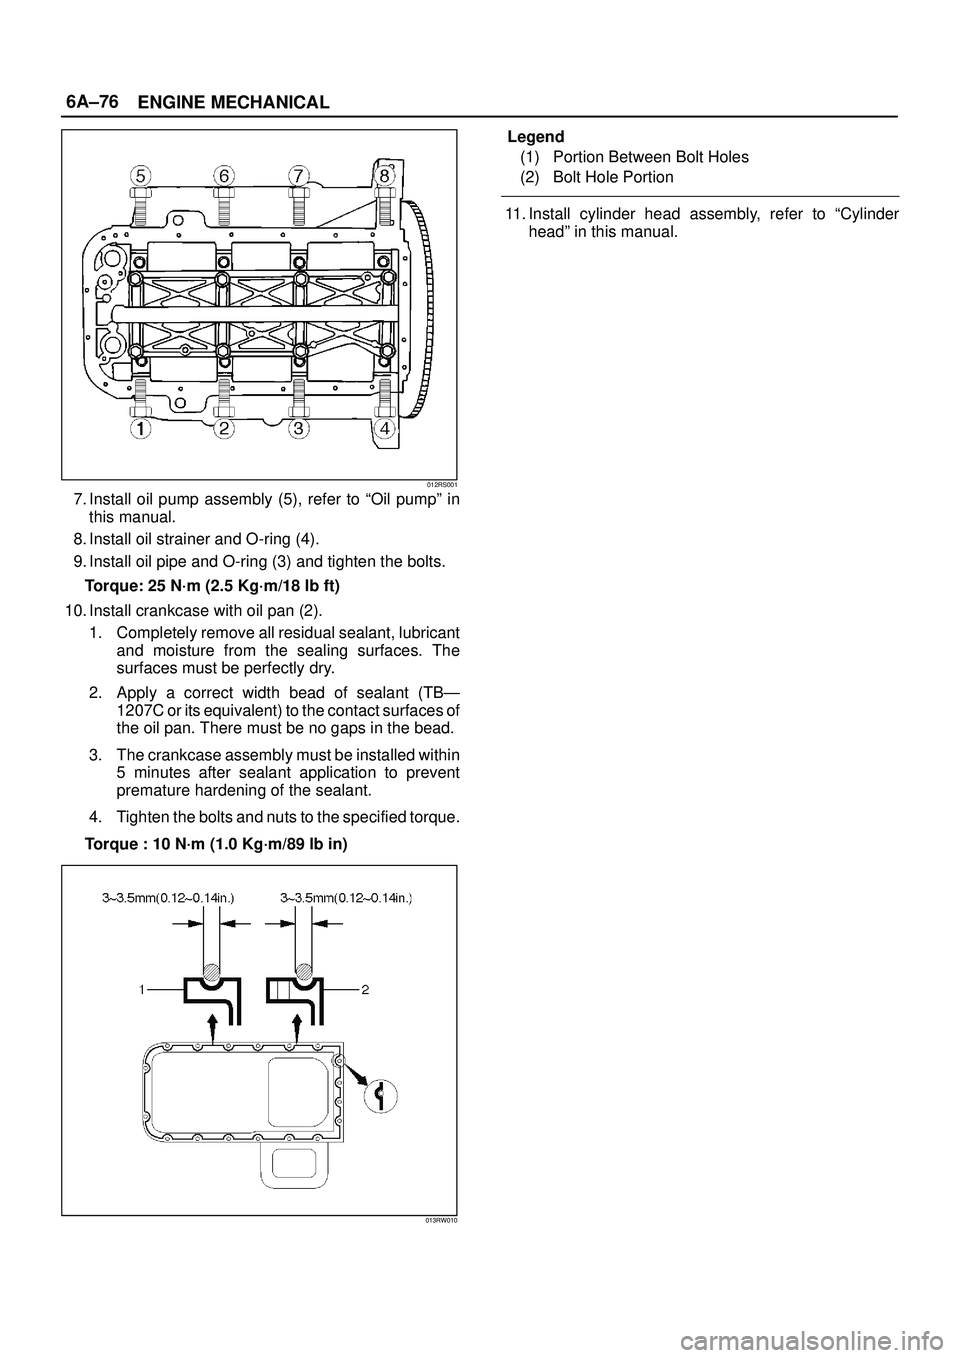 ISUZU TROOPER 1998  Service Repair Manual 6A±76
ENGINE MECHANICAL
012RS001
7. Install oil pump assembly (5), refer to ªOil pumpº in
this manual.
8. Install oil strainer and O-ring (4).
9. Install oil pipe and O-ring (3) and tighten the bol